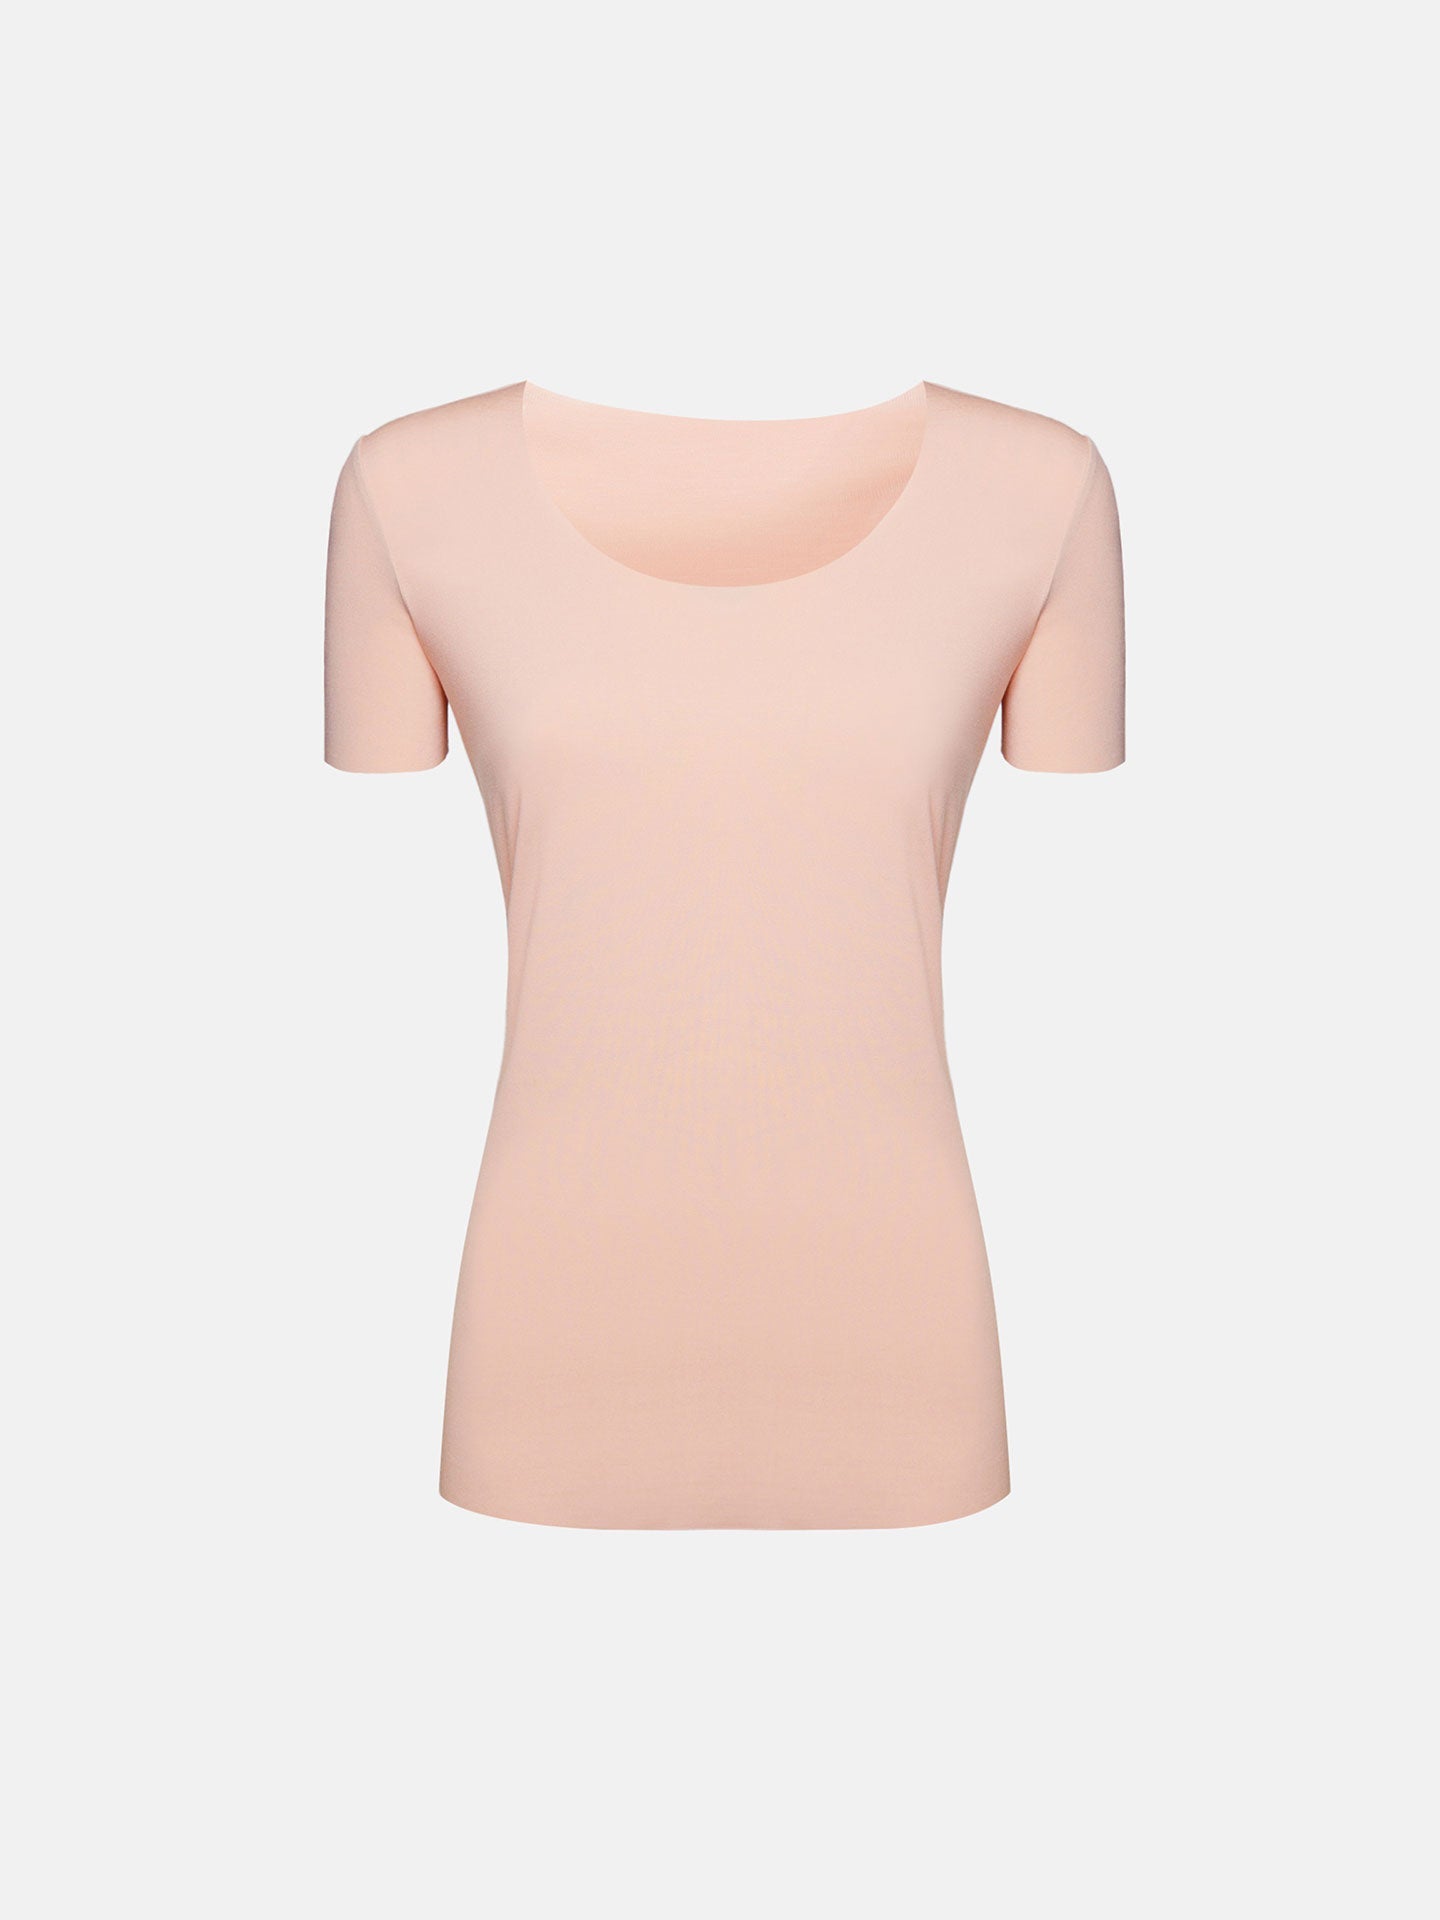 Aurora Pure Top Short Sleeves-Shirts-Wolford-OUTLET-ARCHIVIST